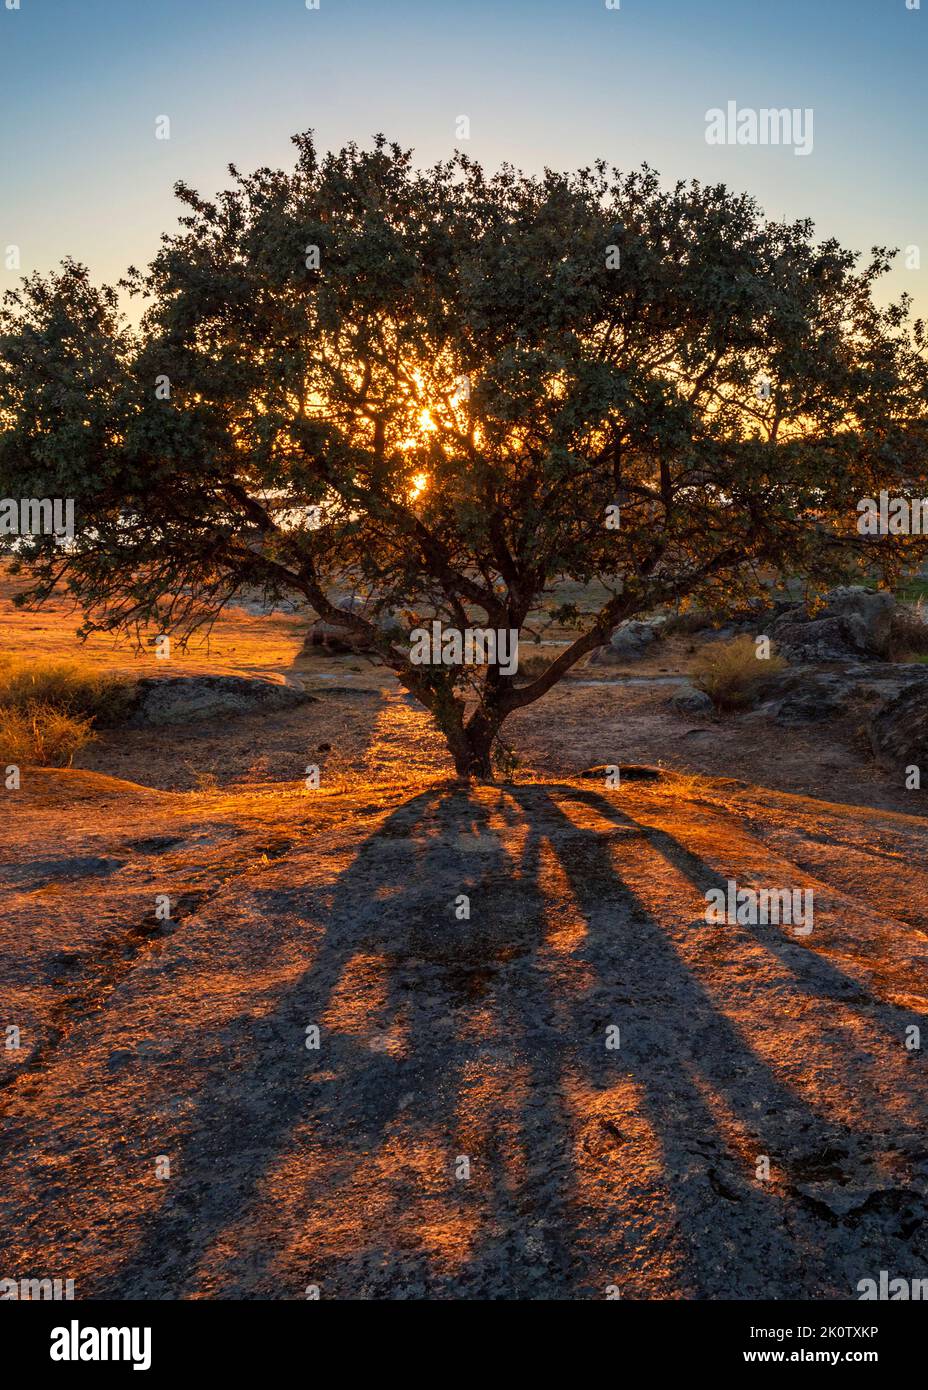 Silhouette of a tree at sunset in the natural monument of Los Barruecos, Cáceres, Spain. Stock Photo